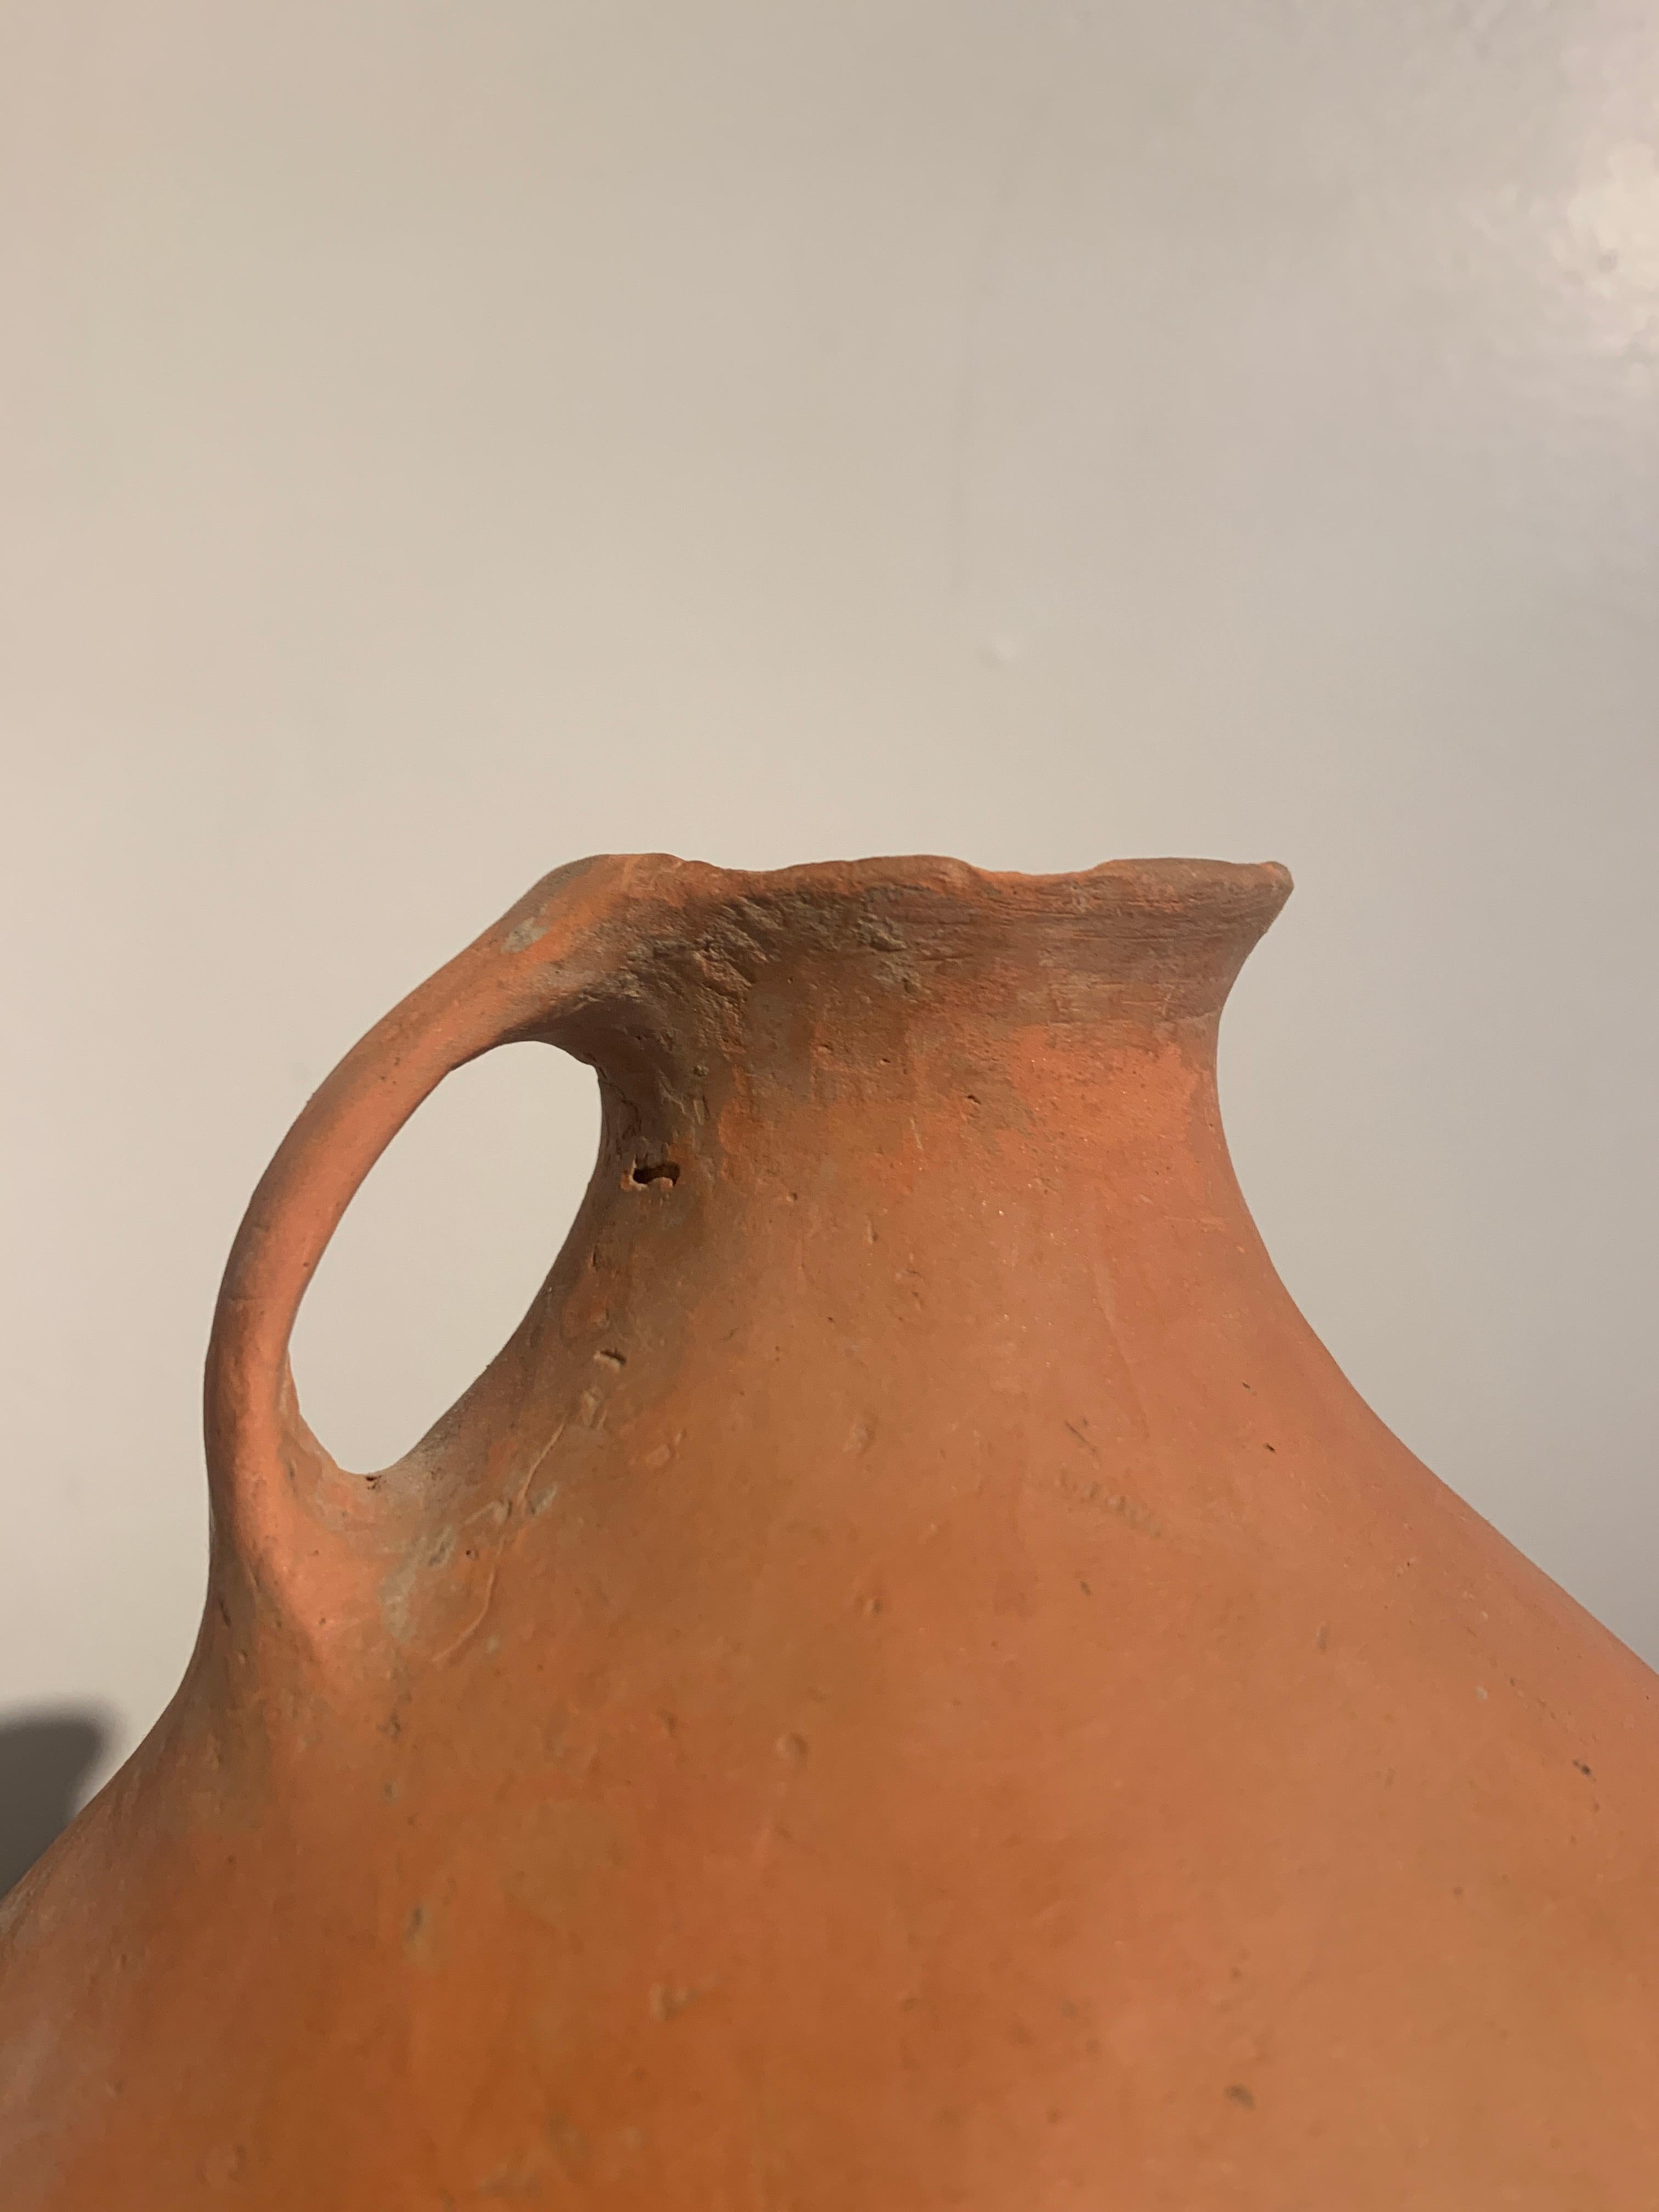 18th Century and Earlier Chinese Neolithic Qijia Culture Red Pottery Vessel, 2200 BC - 1600 BC, China For Sale